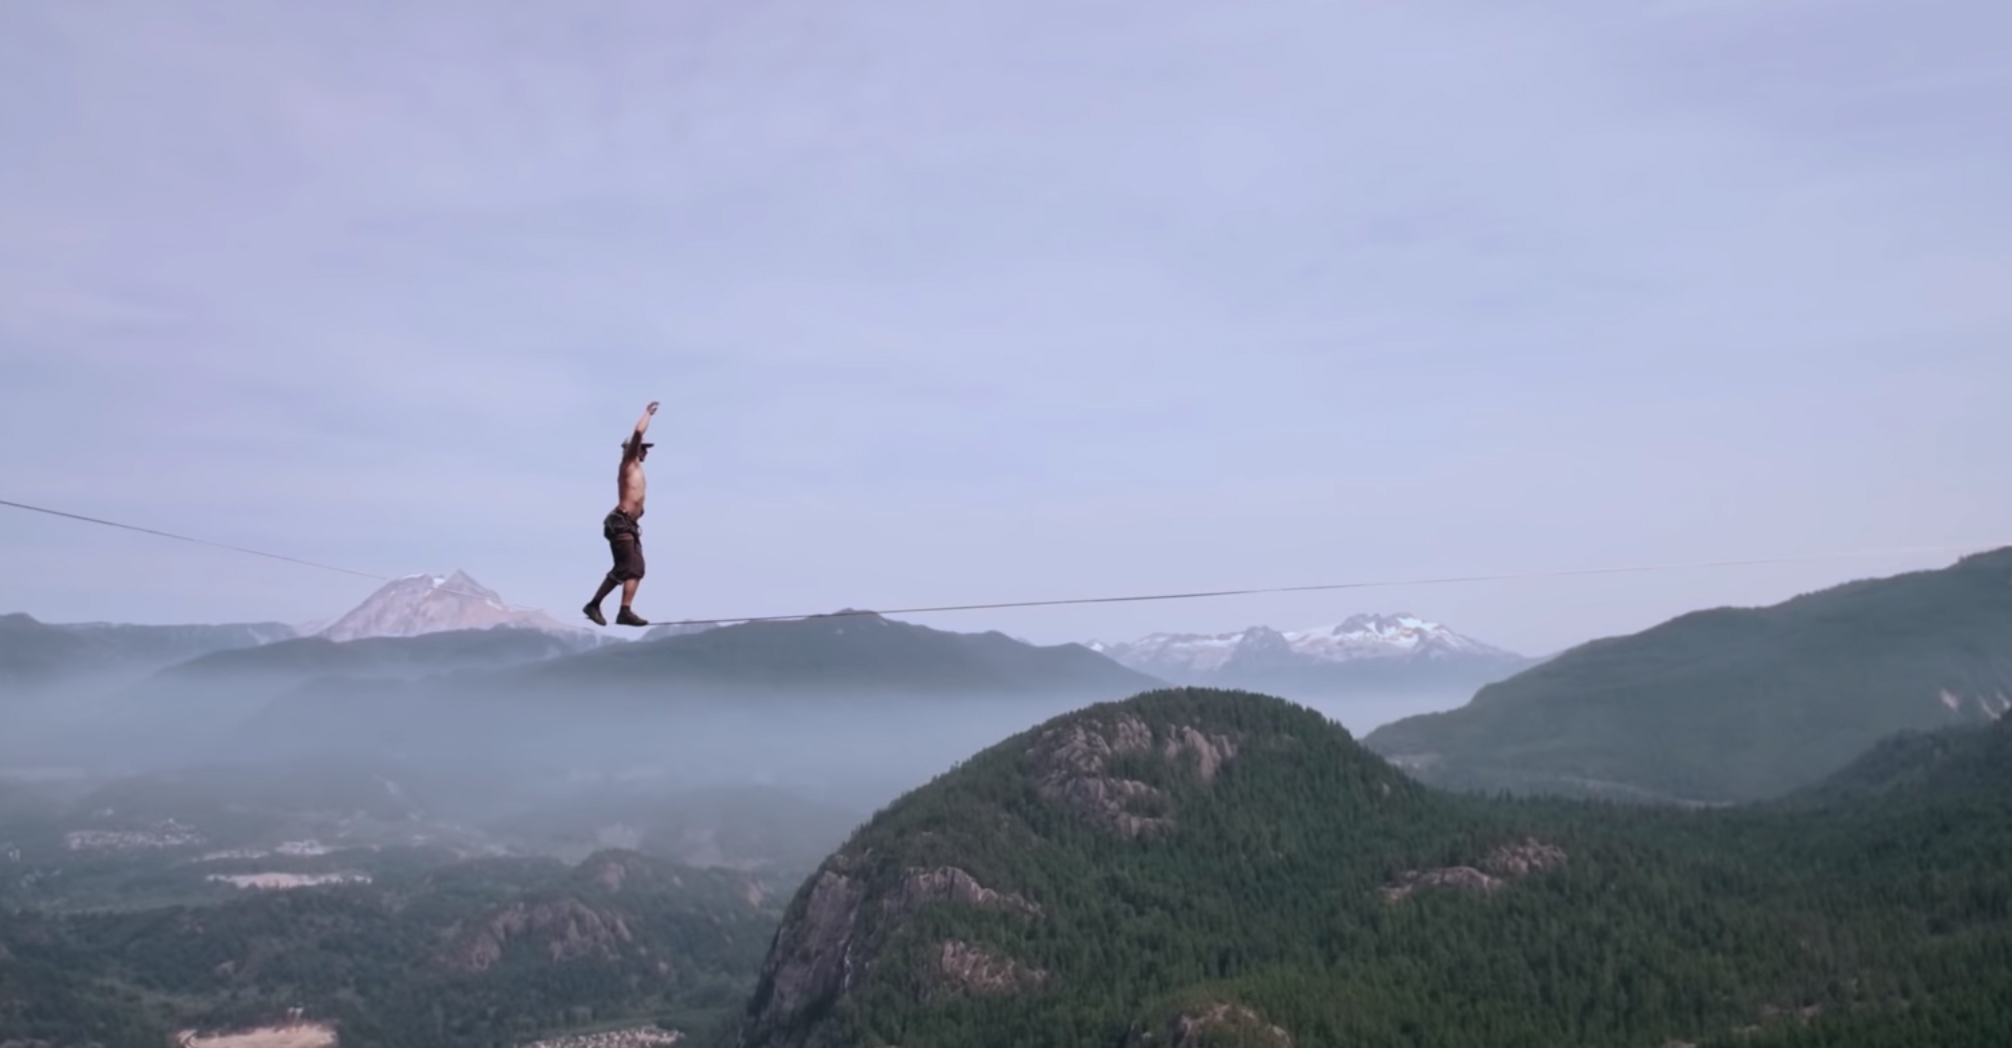 Watch ‘Untethered’: The Terrifying Art of Free Solo Slacklining